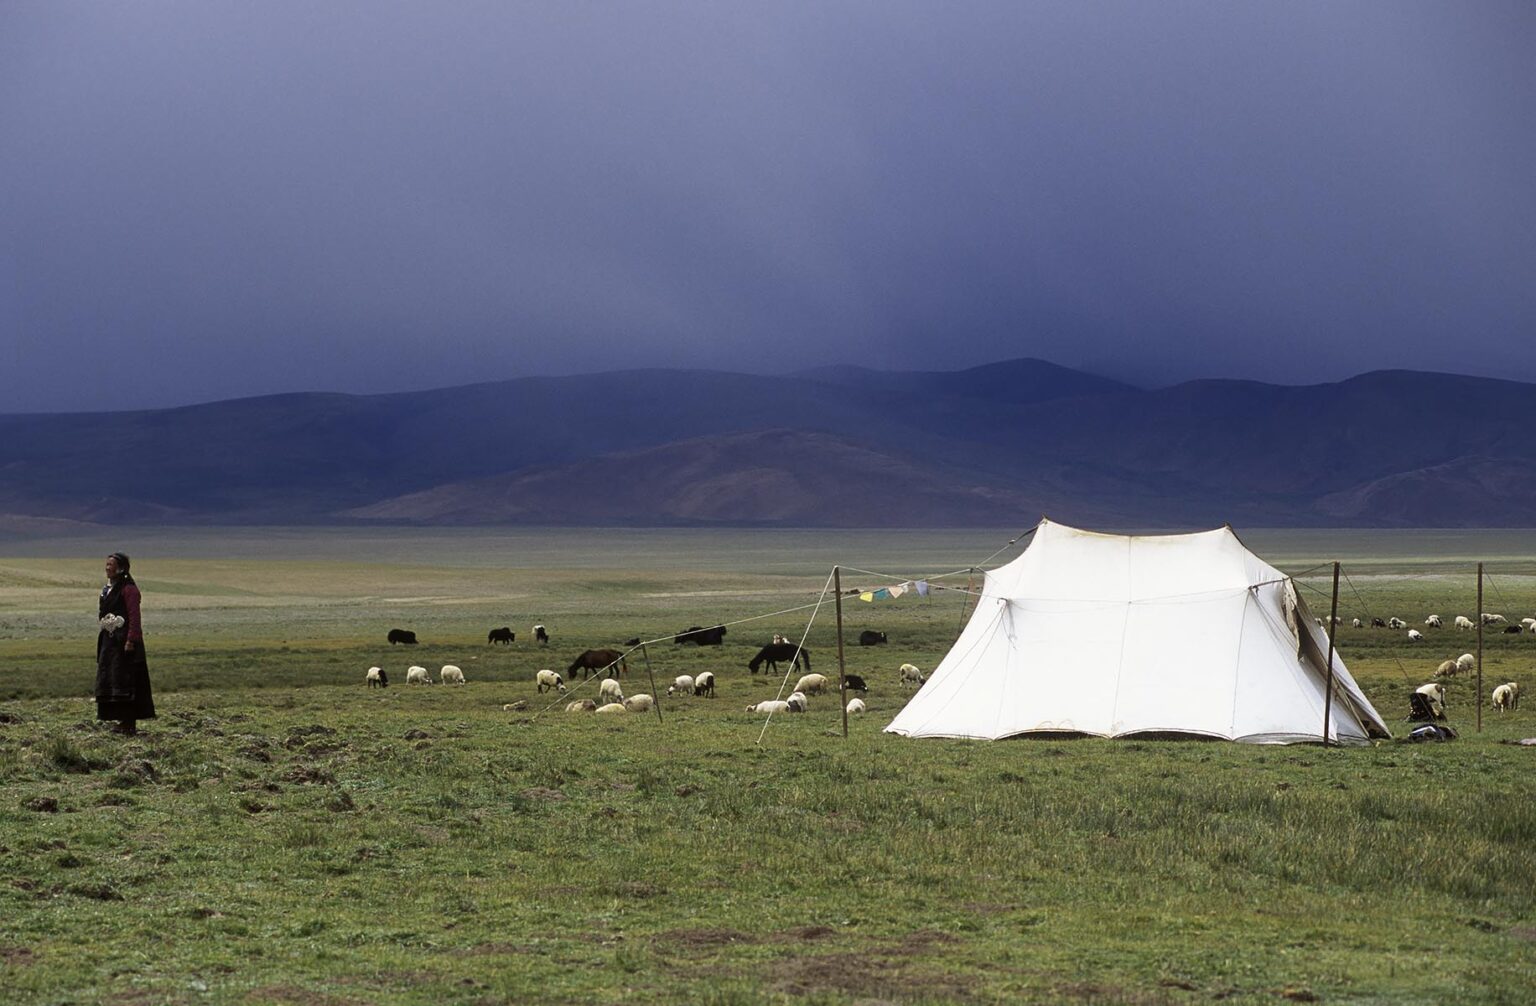 A DROKPA (Tibetan nomad) walks near her TENT watching her SHEEP,YAKS and PONIES - Southern route to MOUNT KAILASH, TIBET